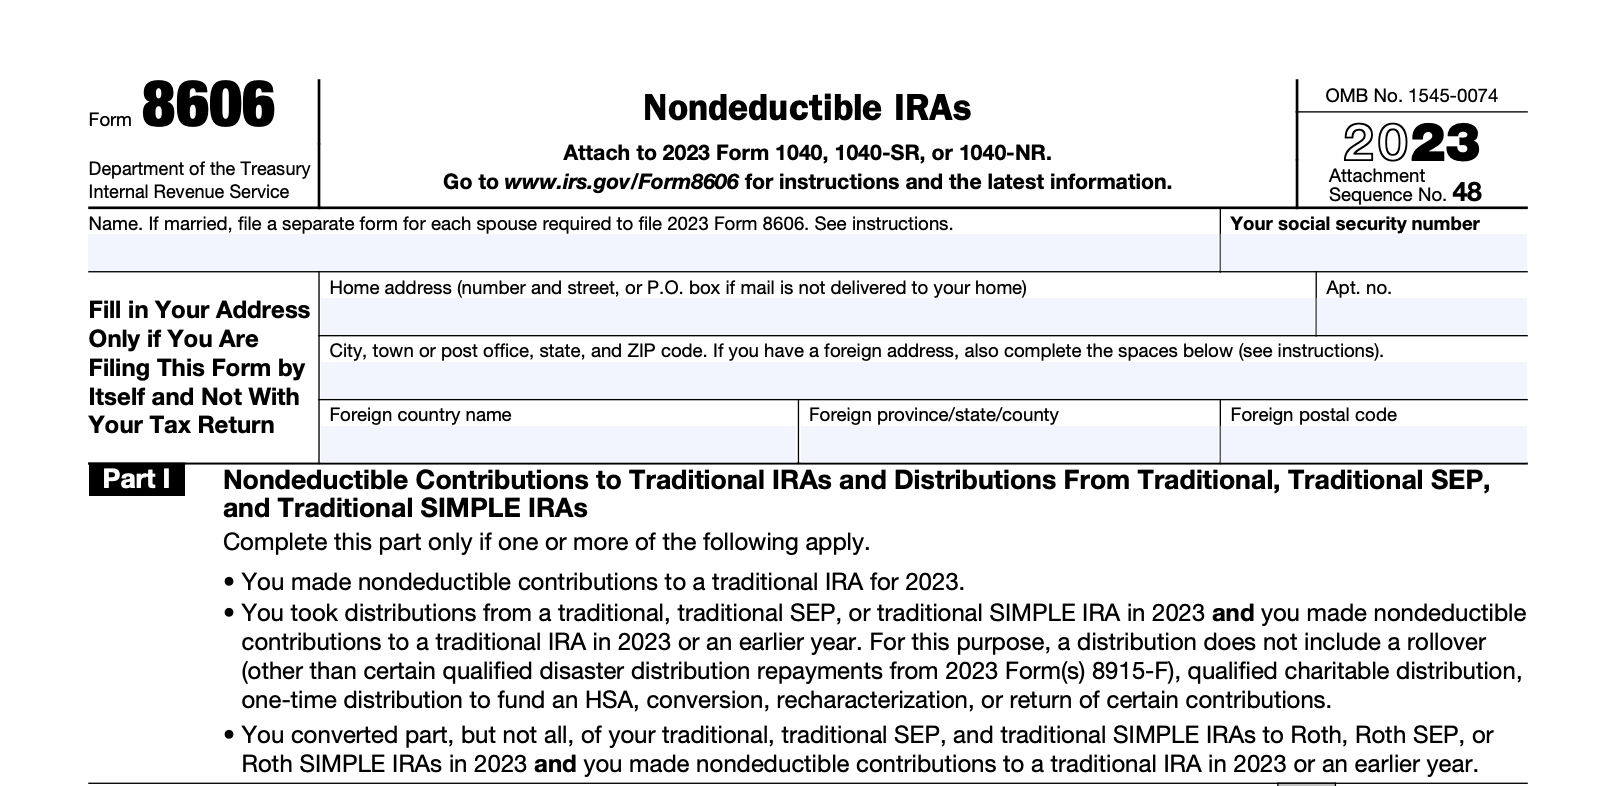 Part I of Form 8606 must be filled if you have nondeductible contributions to a traditional IRA.